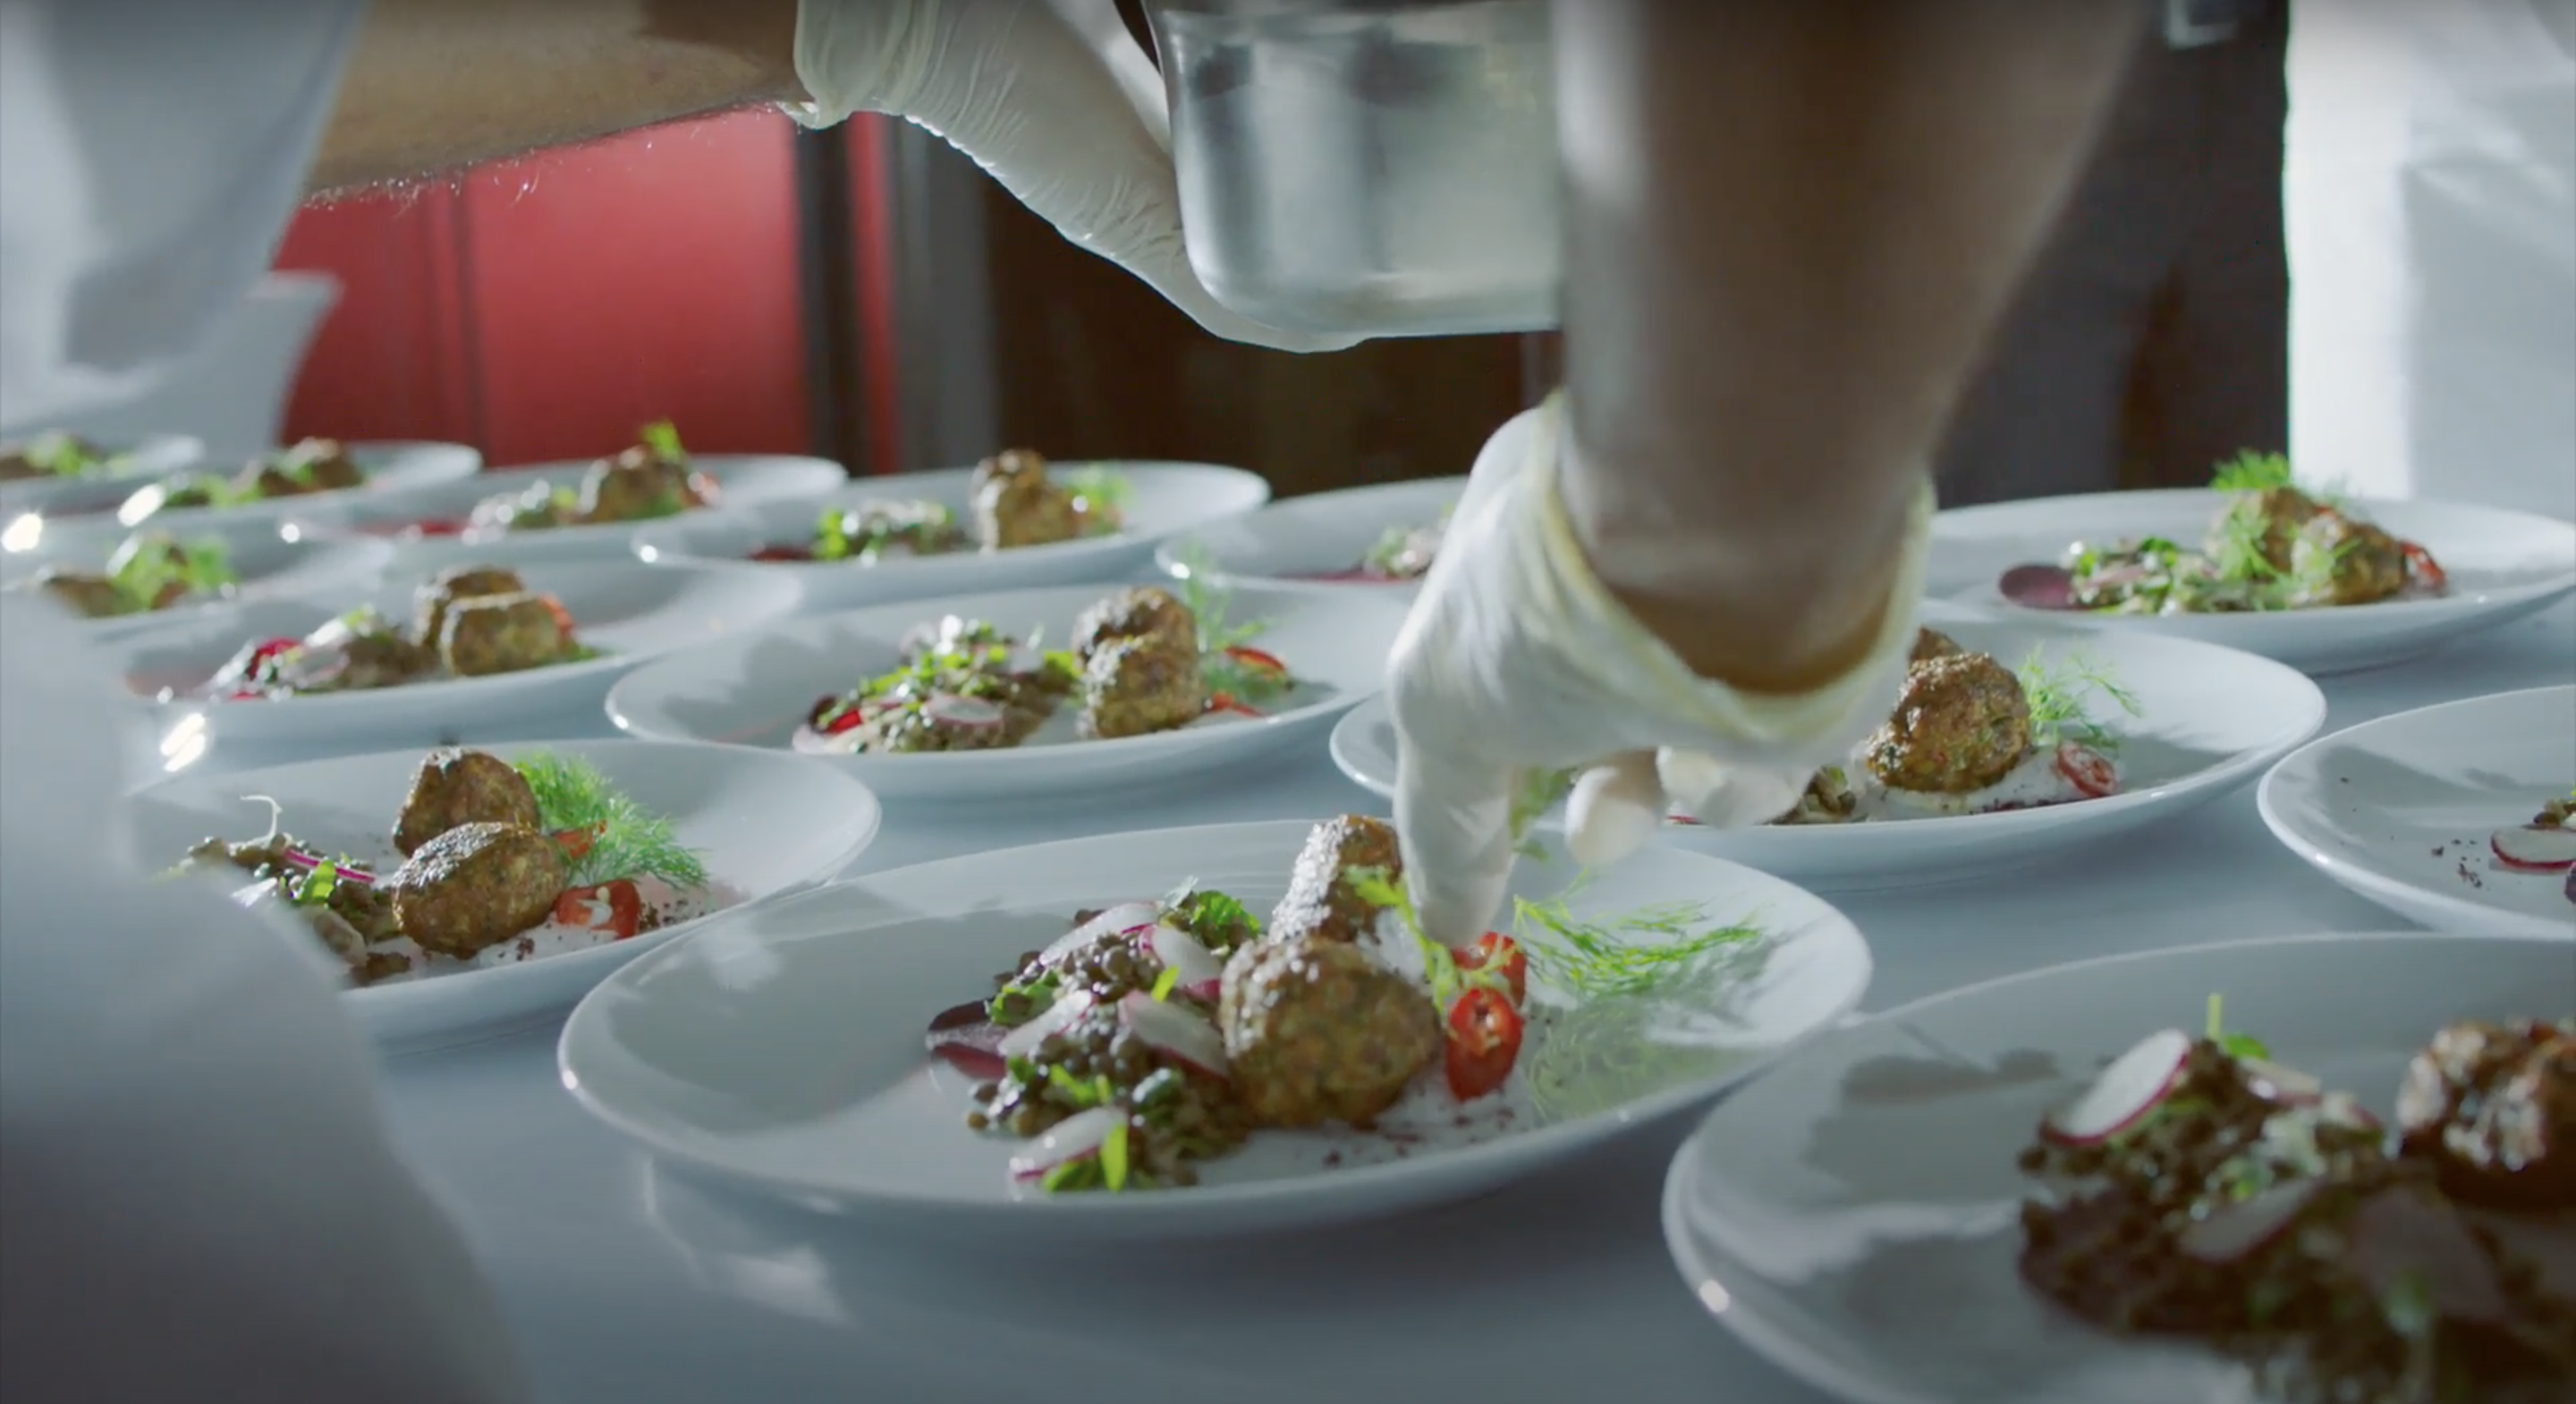 A chef's gloved hand adds the finishing touches to plated dishes, ready to be served at the Years of Culture opening ceremony